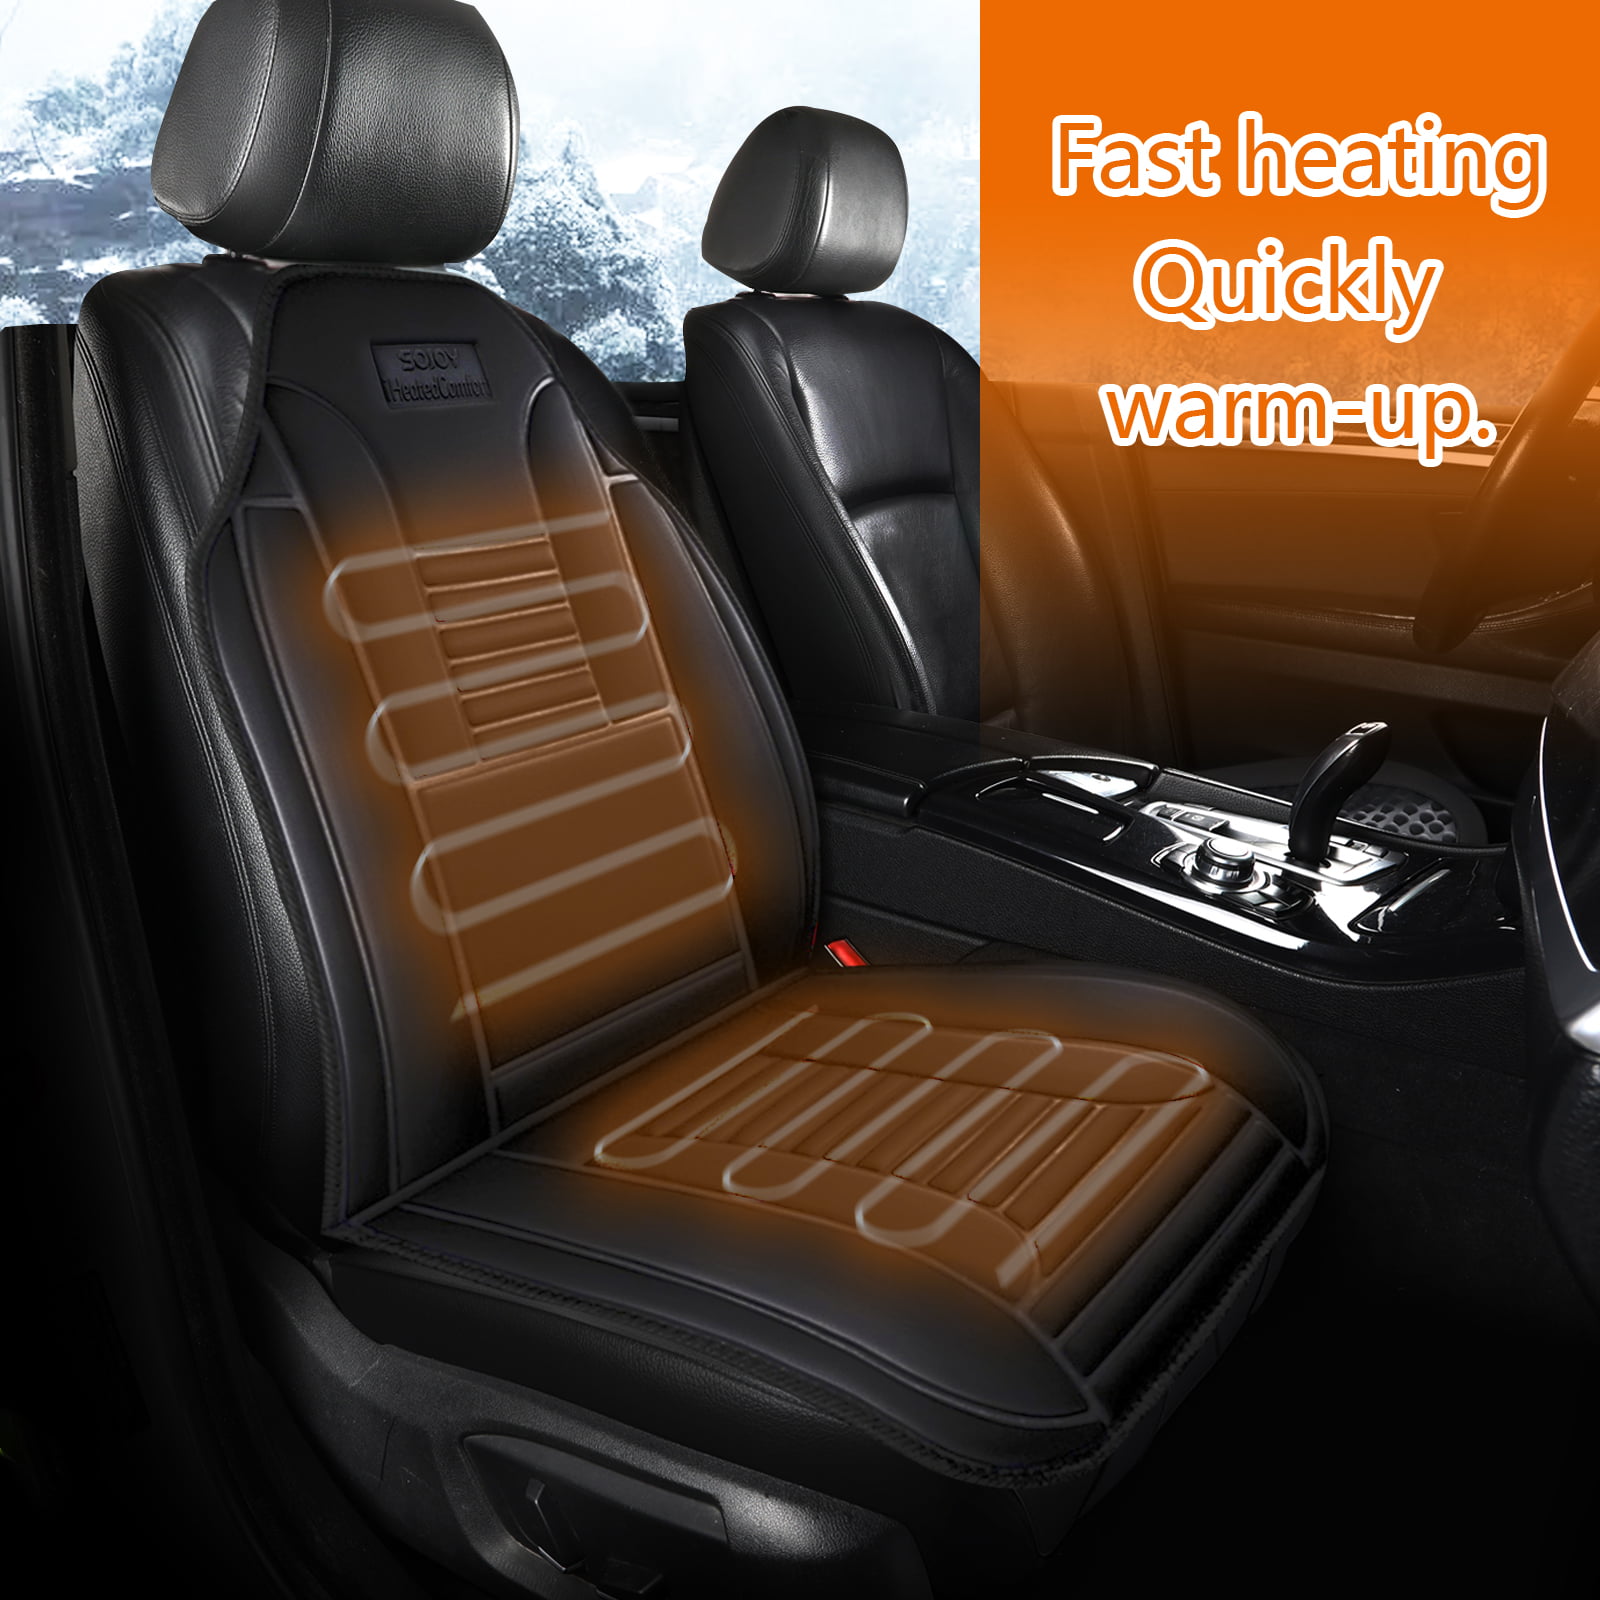 Double DC 12V Universal Car Heated Seat Cover Cushion Auto Heater Warm